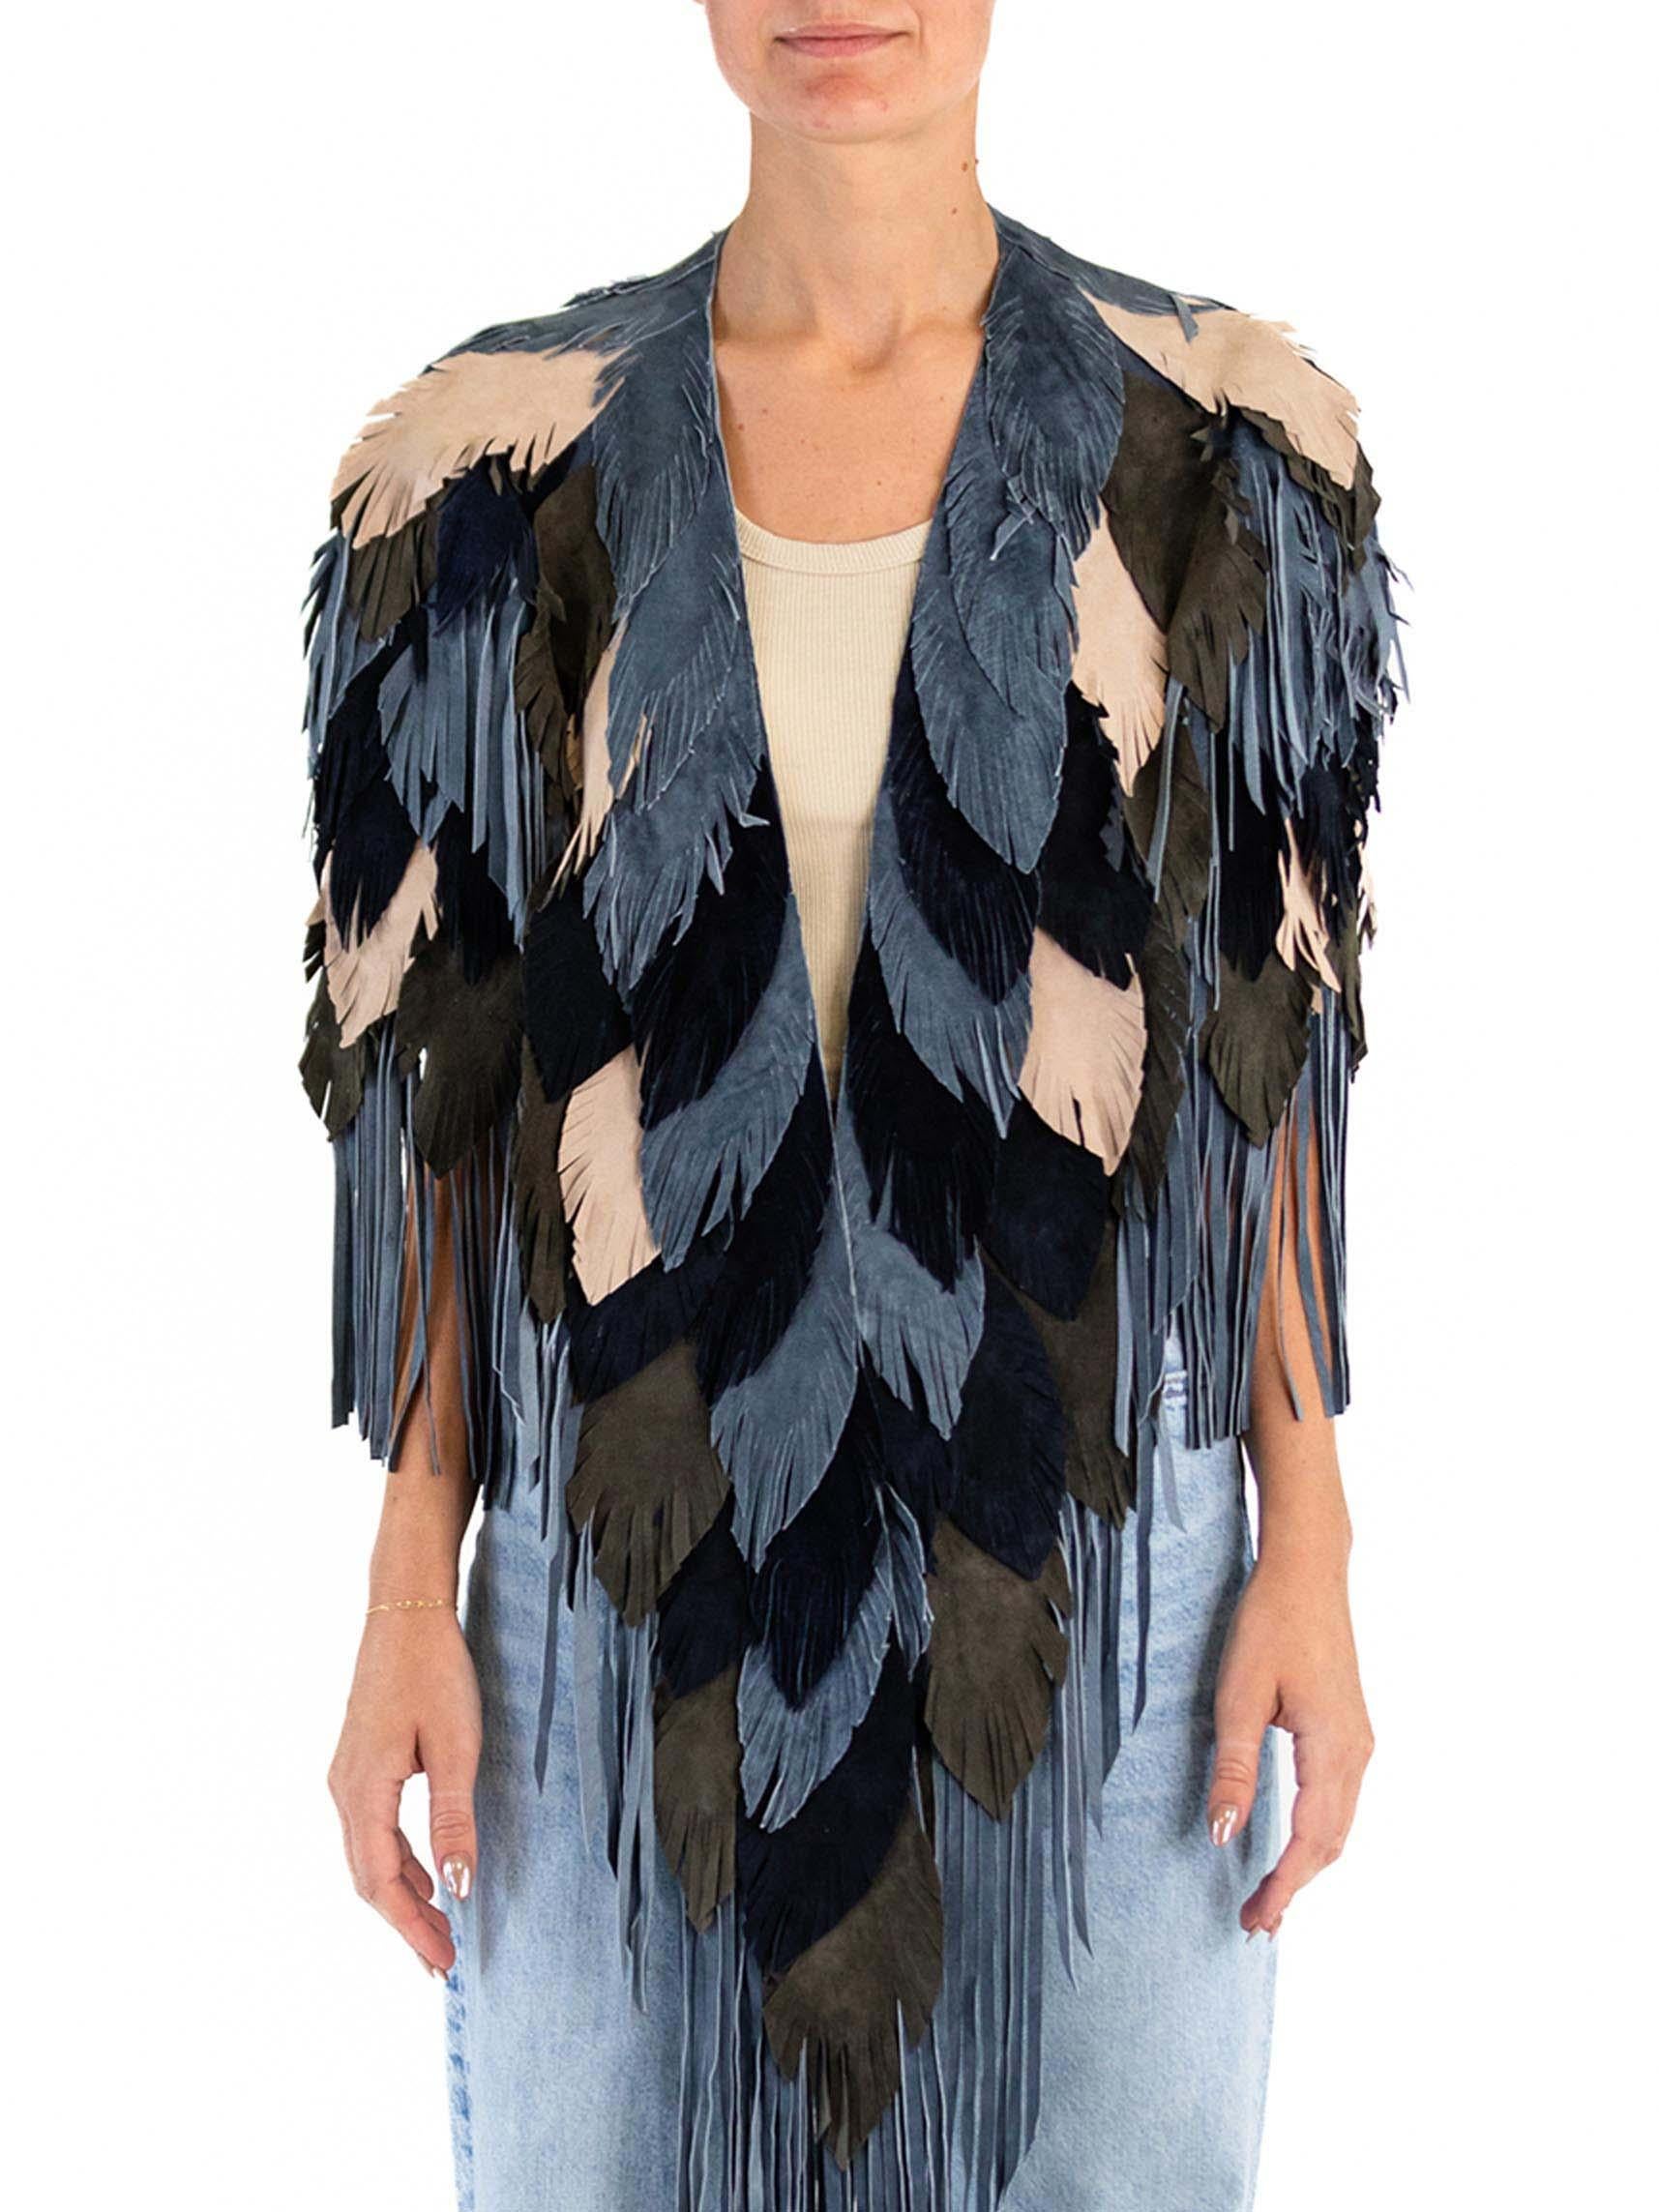 Each Feather-Leather is made by hand by our friends in Columbia in their co-op owned and operated facilities.  MORPHEW COLLECTION Suede Fringe Feather Leather Long Cape 
MORPHEW COLLECTION is made entirely by hand in our NYC Ateliér of rare antique